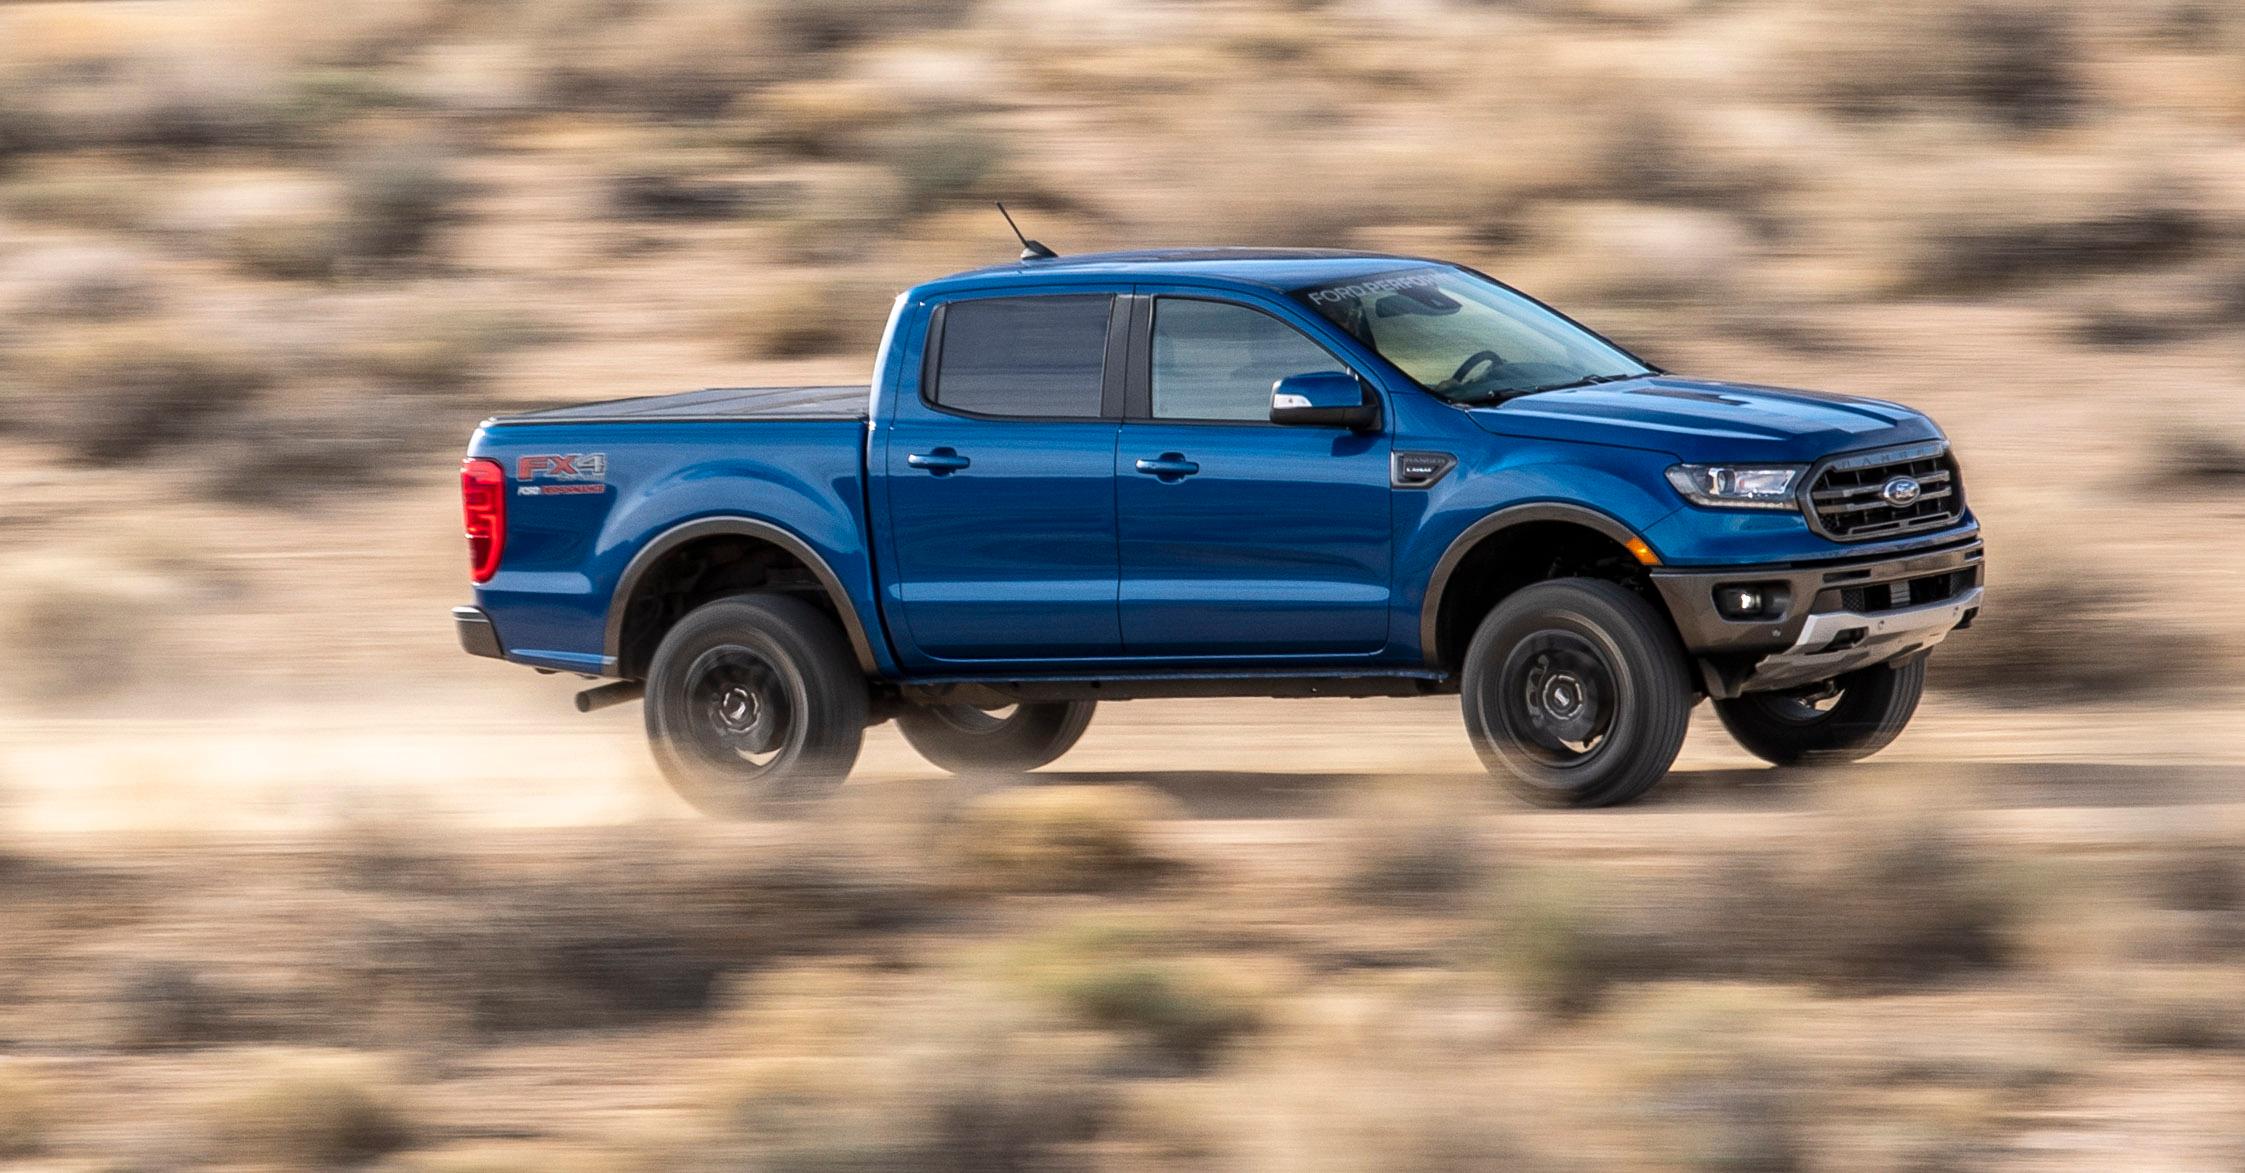 Image of a blue Ford Ranger courtesy of Ford. 